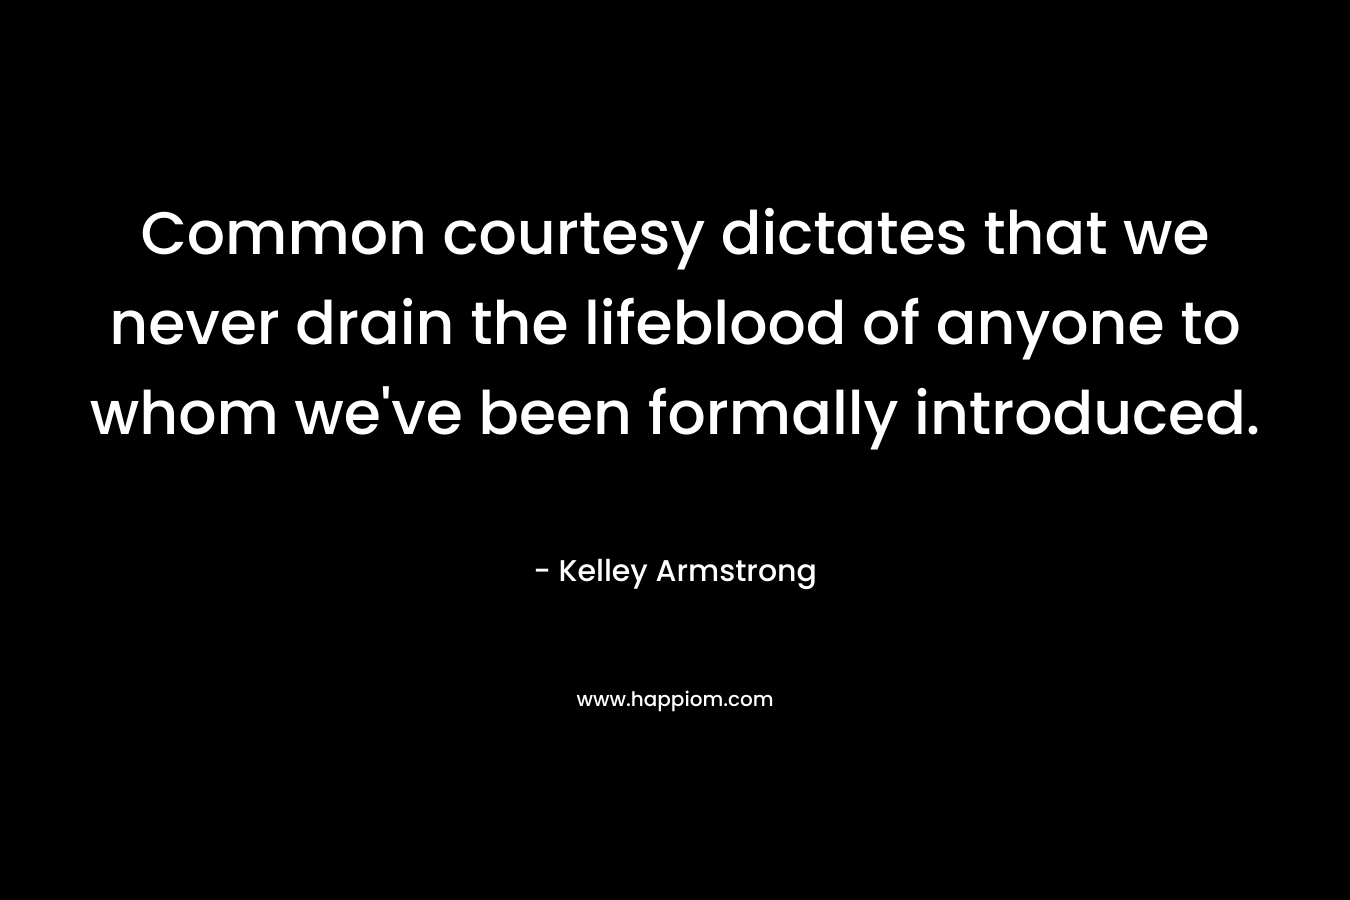 Common courtesy dictates that we never drain the lifeblood of anyone to whom we’ve been formally introduced. – Kelley Armstrong